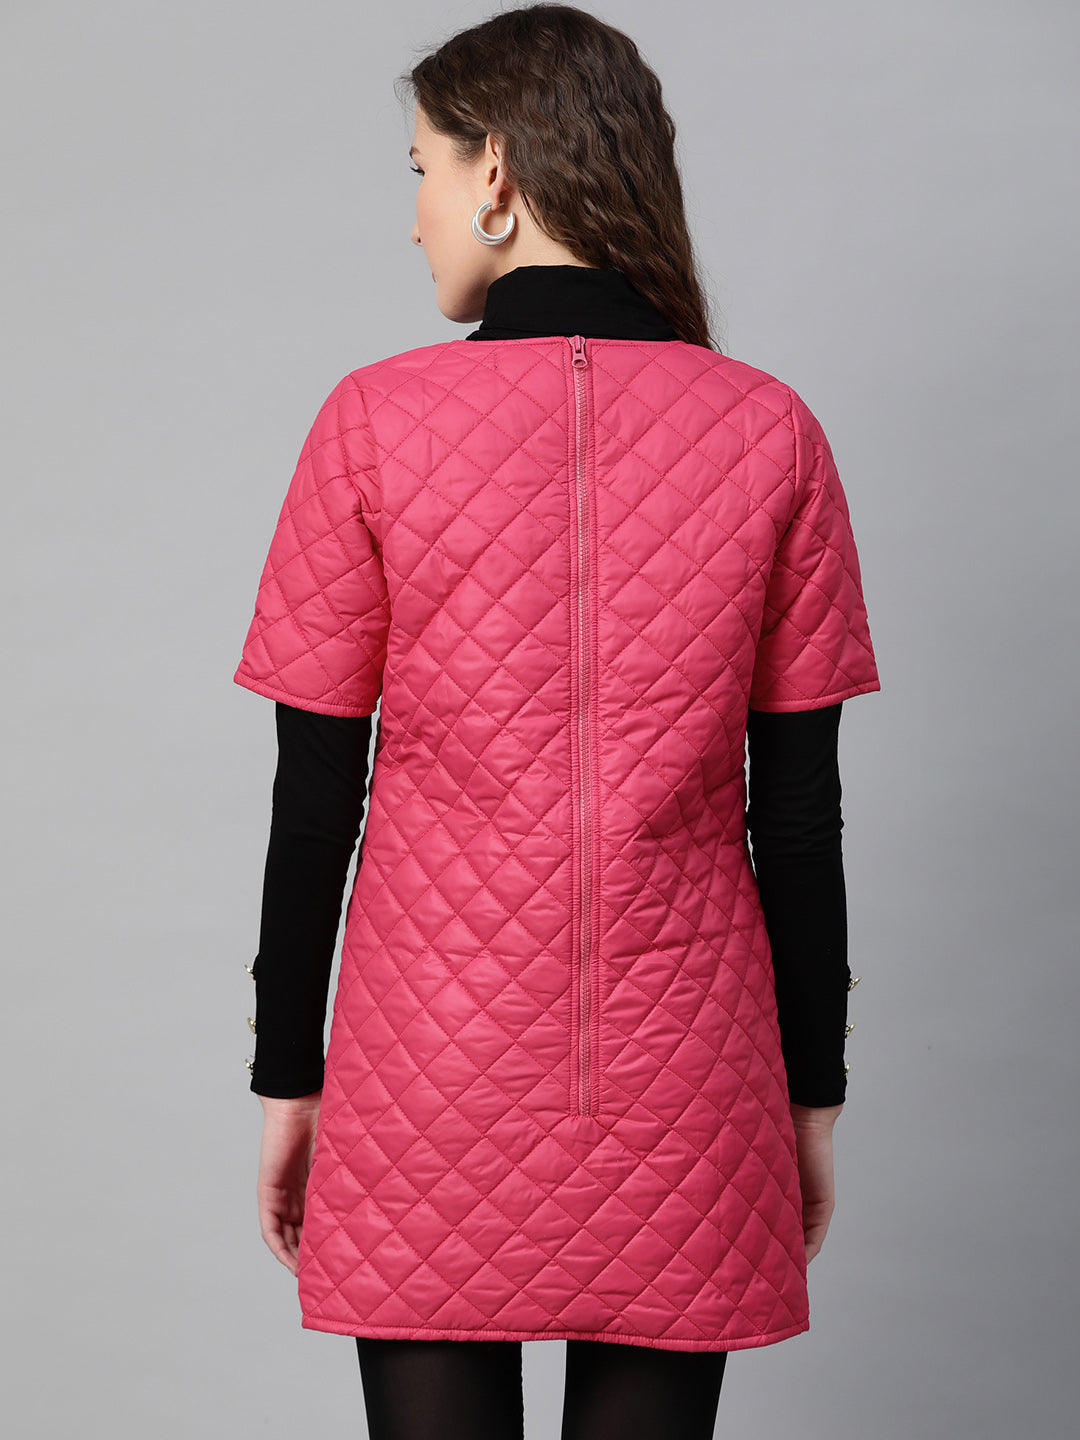 Fuchsia Quilted Shift Dress